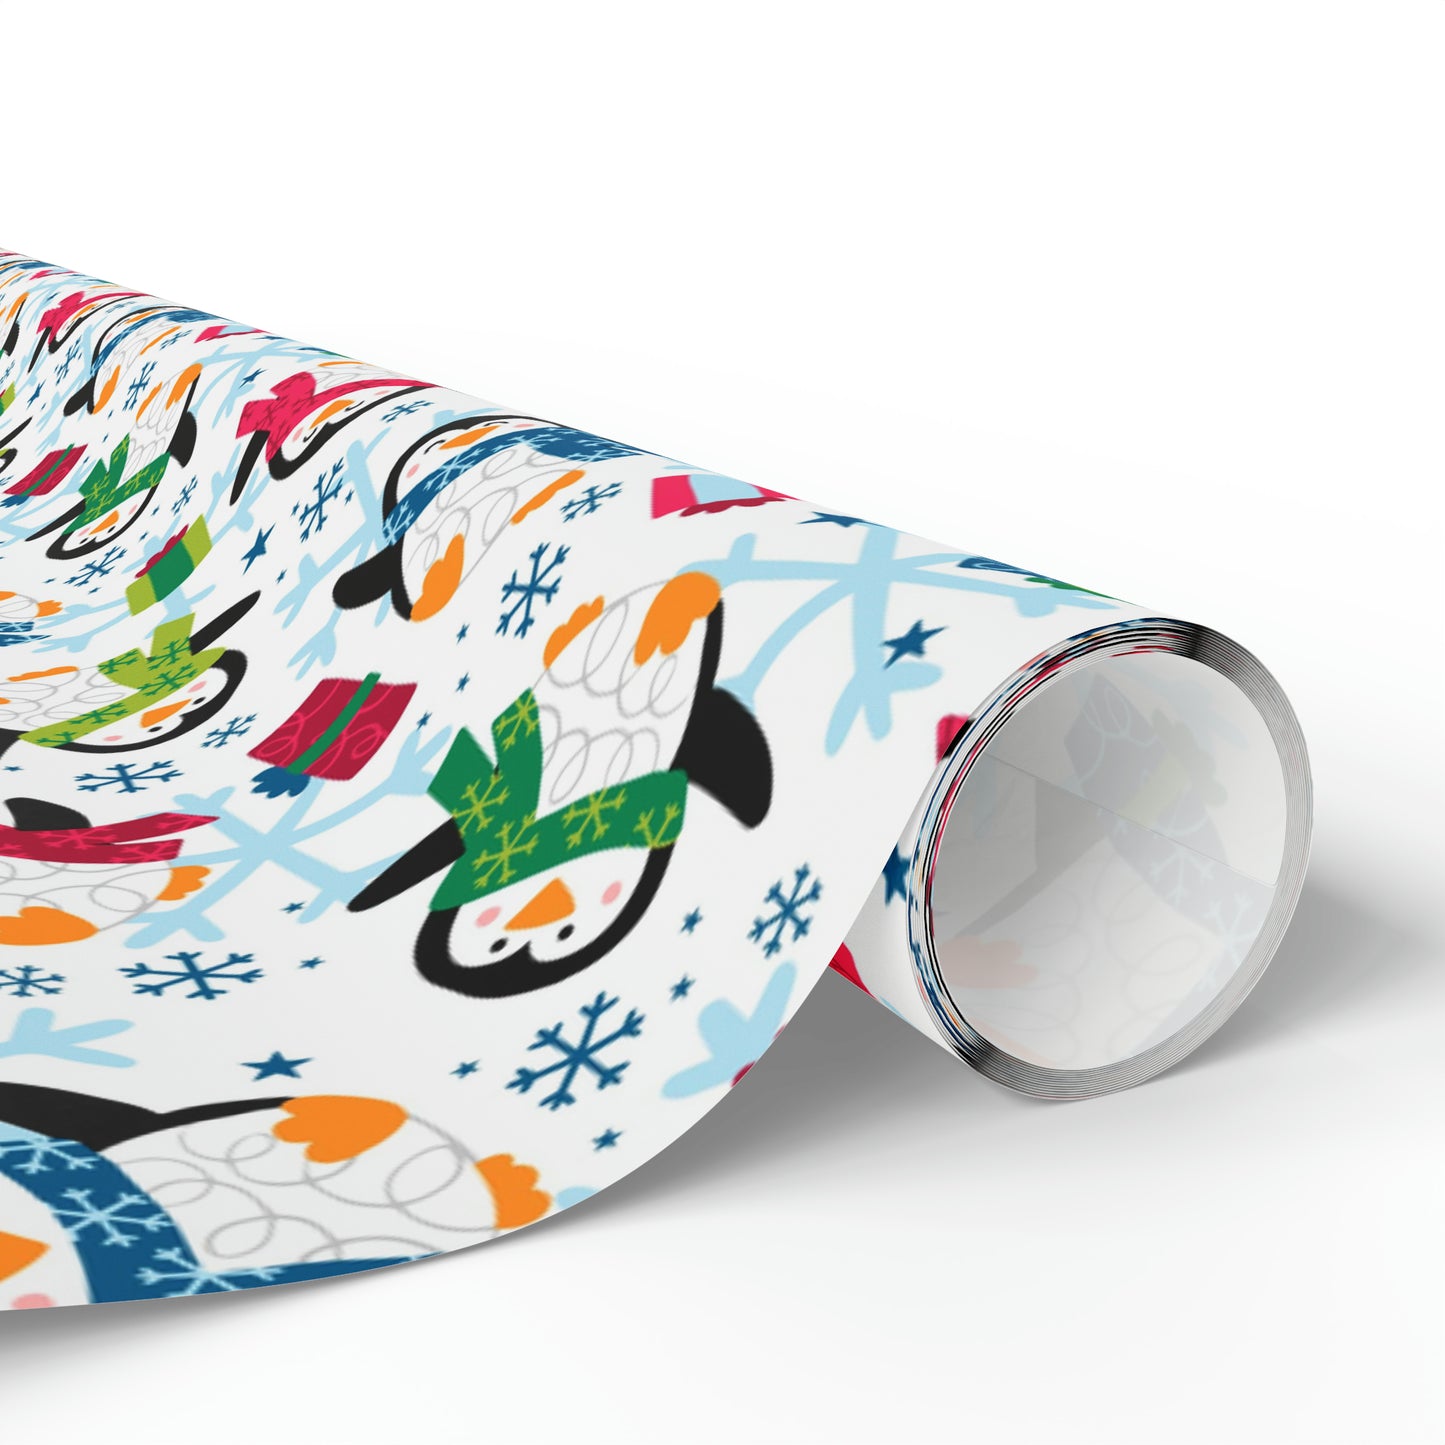 Penguins and Snowflakes Gift Wrap Paper